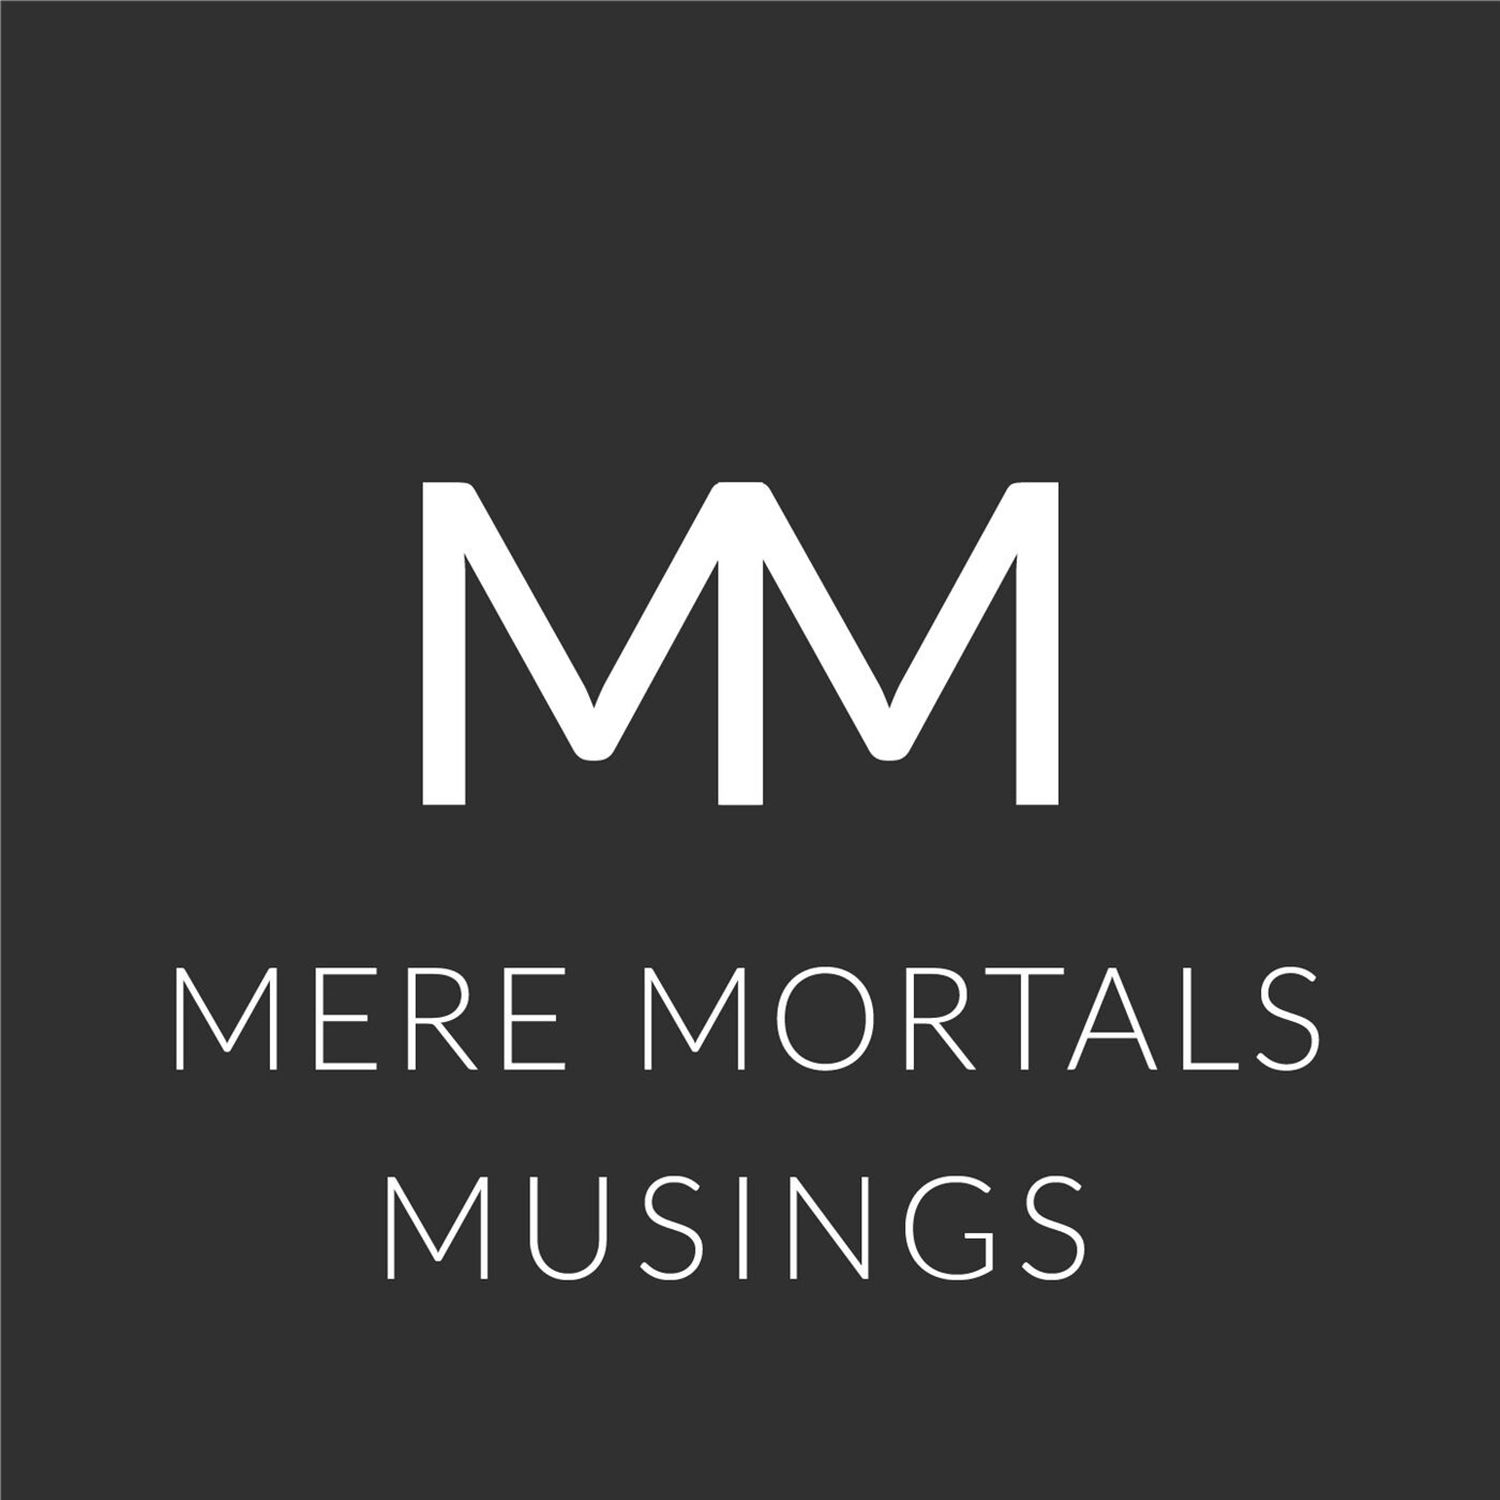 Laugh When The Abyss Stares Back At You (Mere Mortals Episode #99 - Musings)